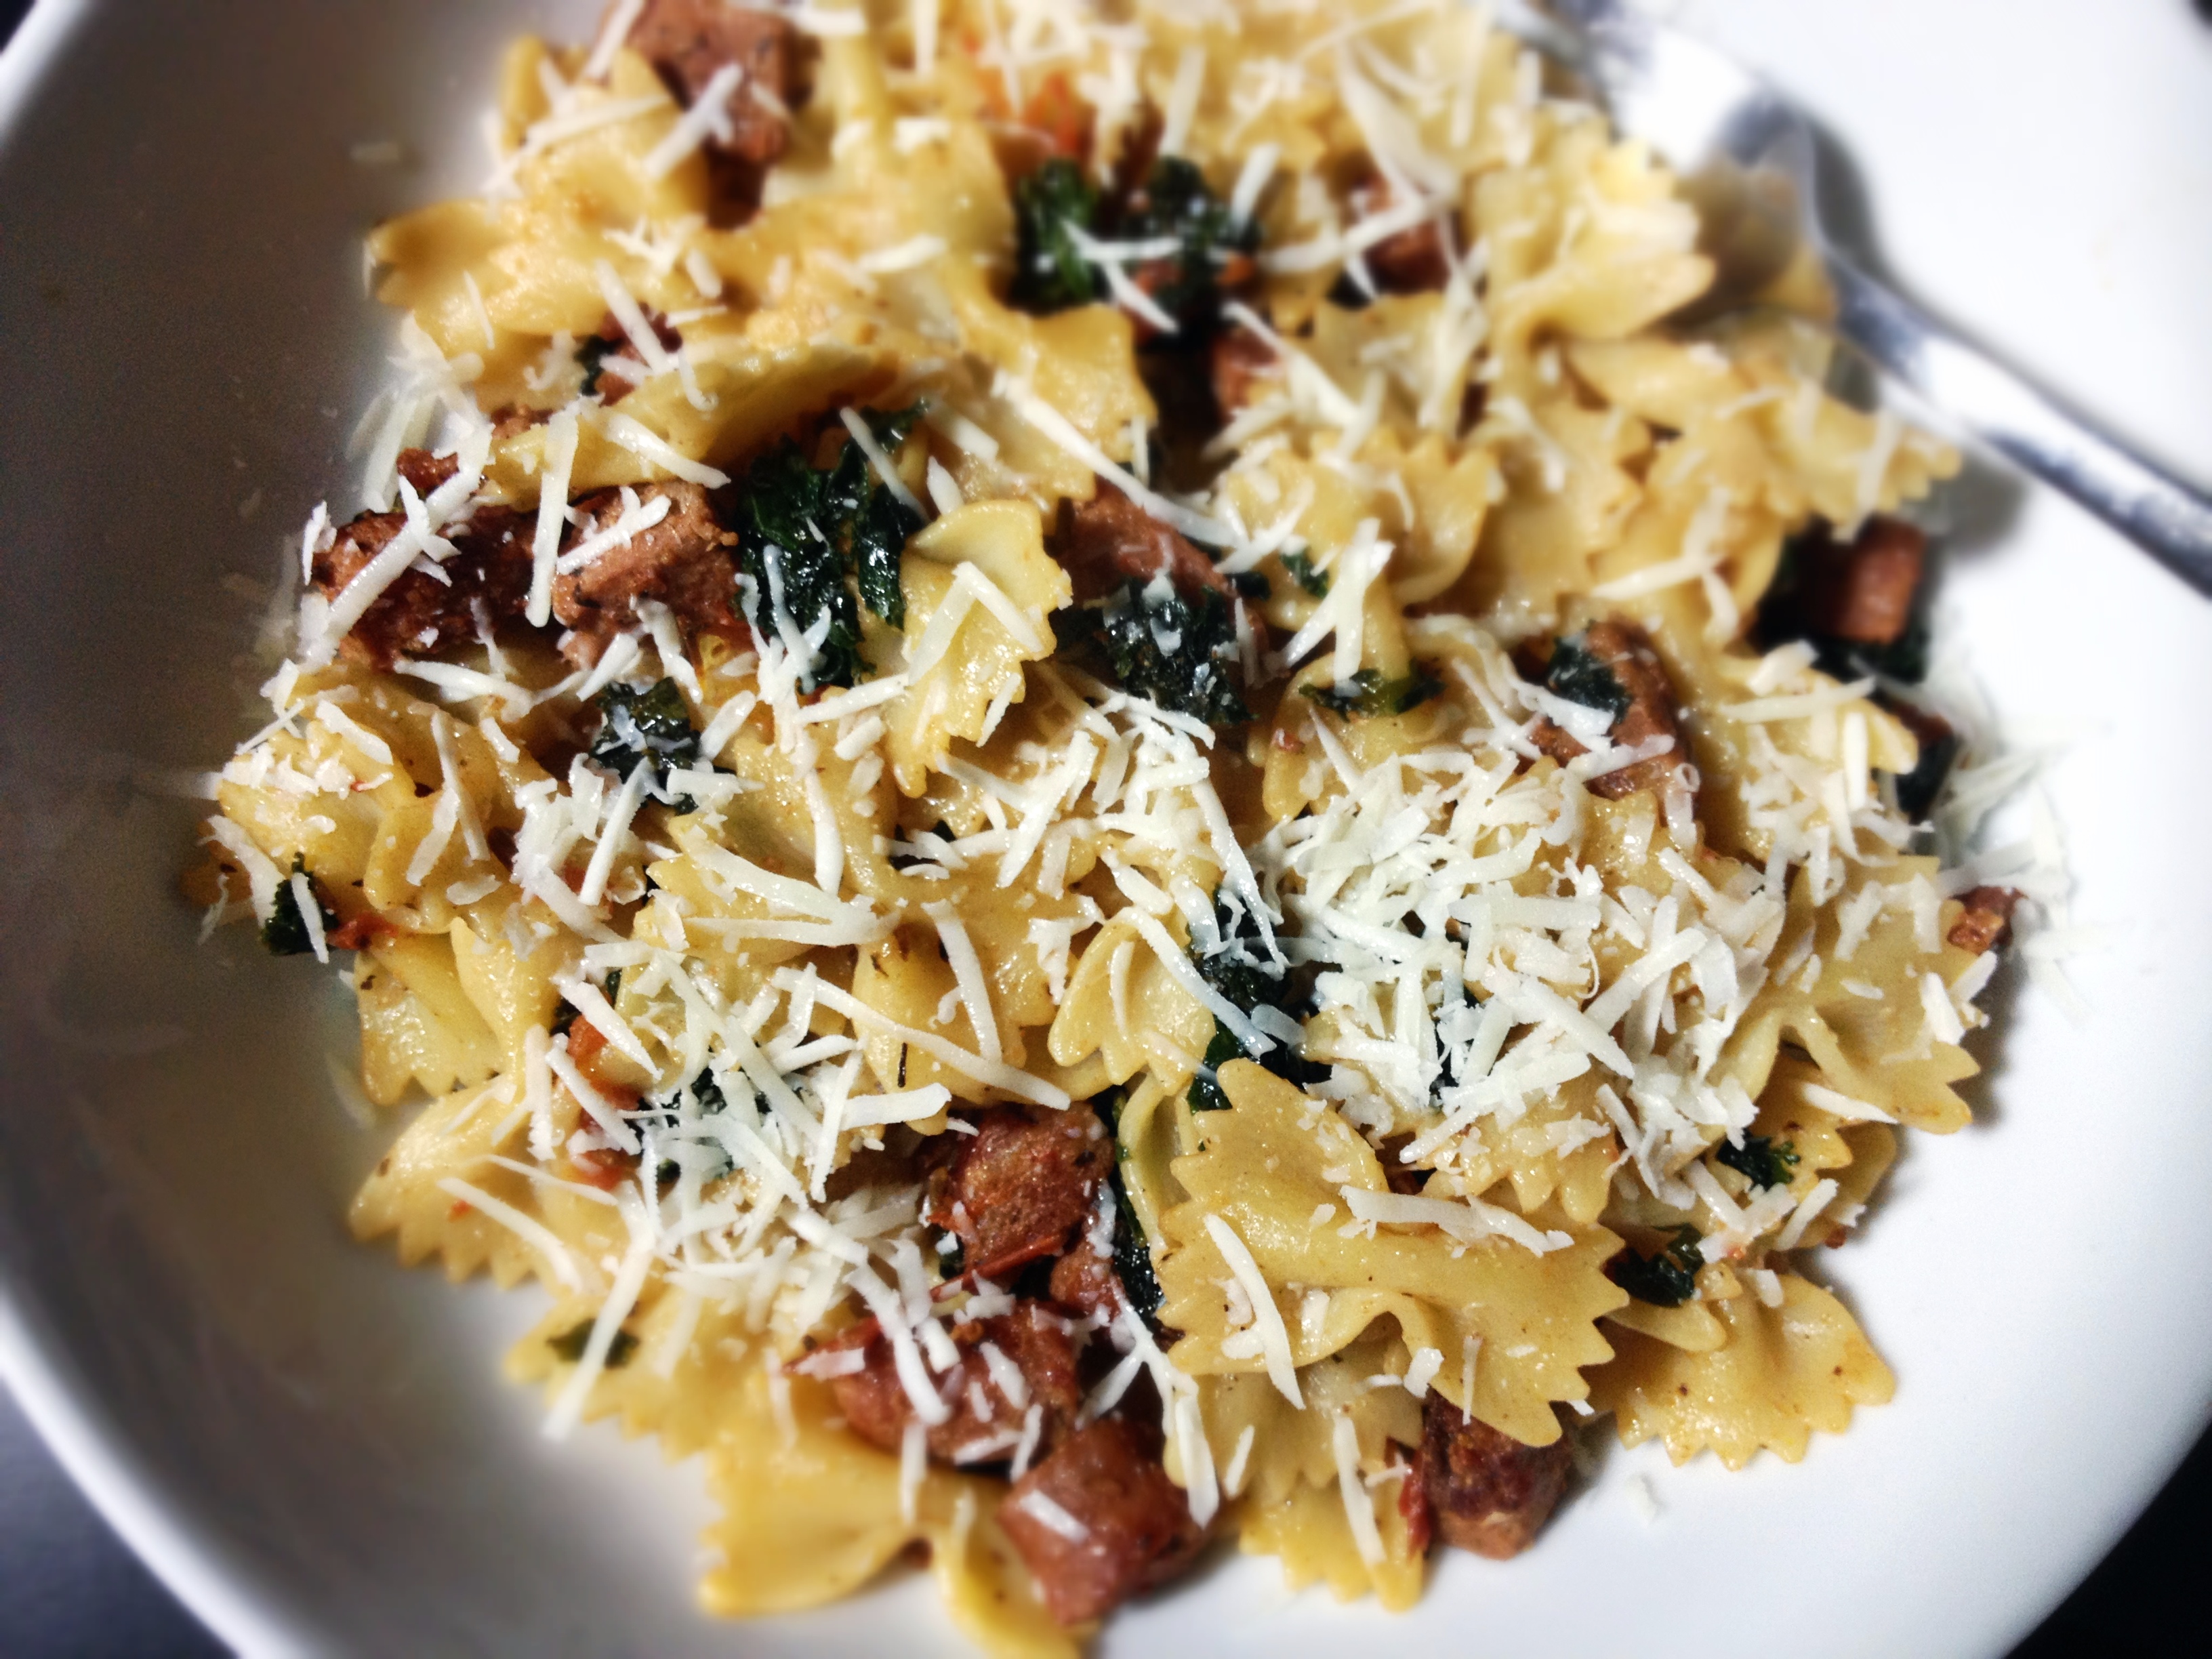 Farfalle con salchichas y berza / Farfale with Sausages and Kale